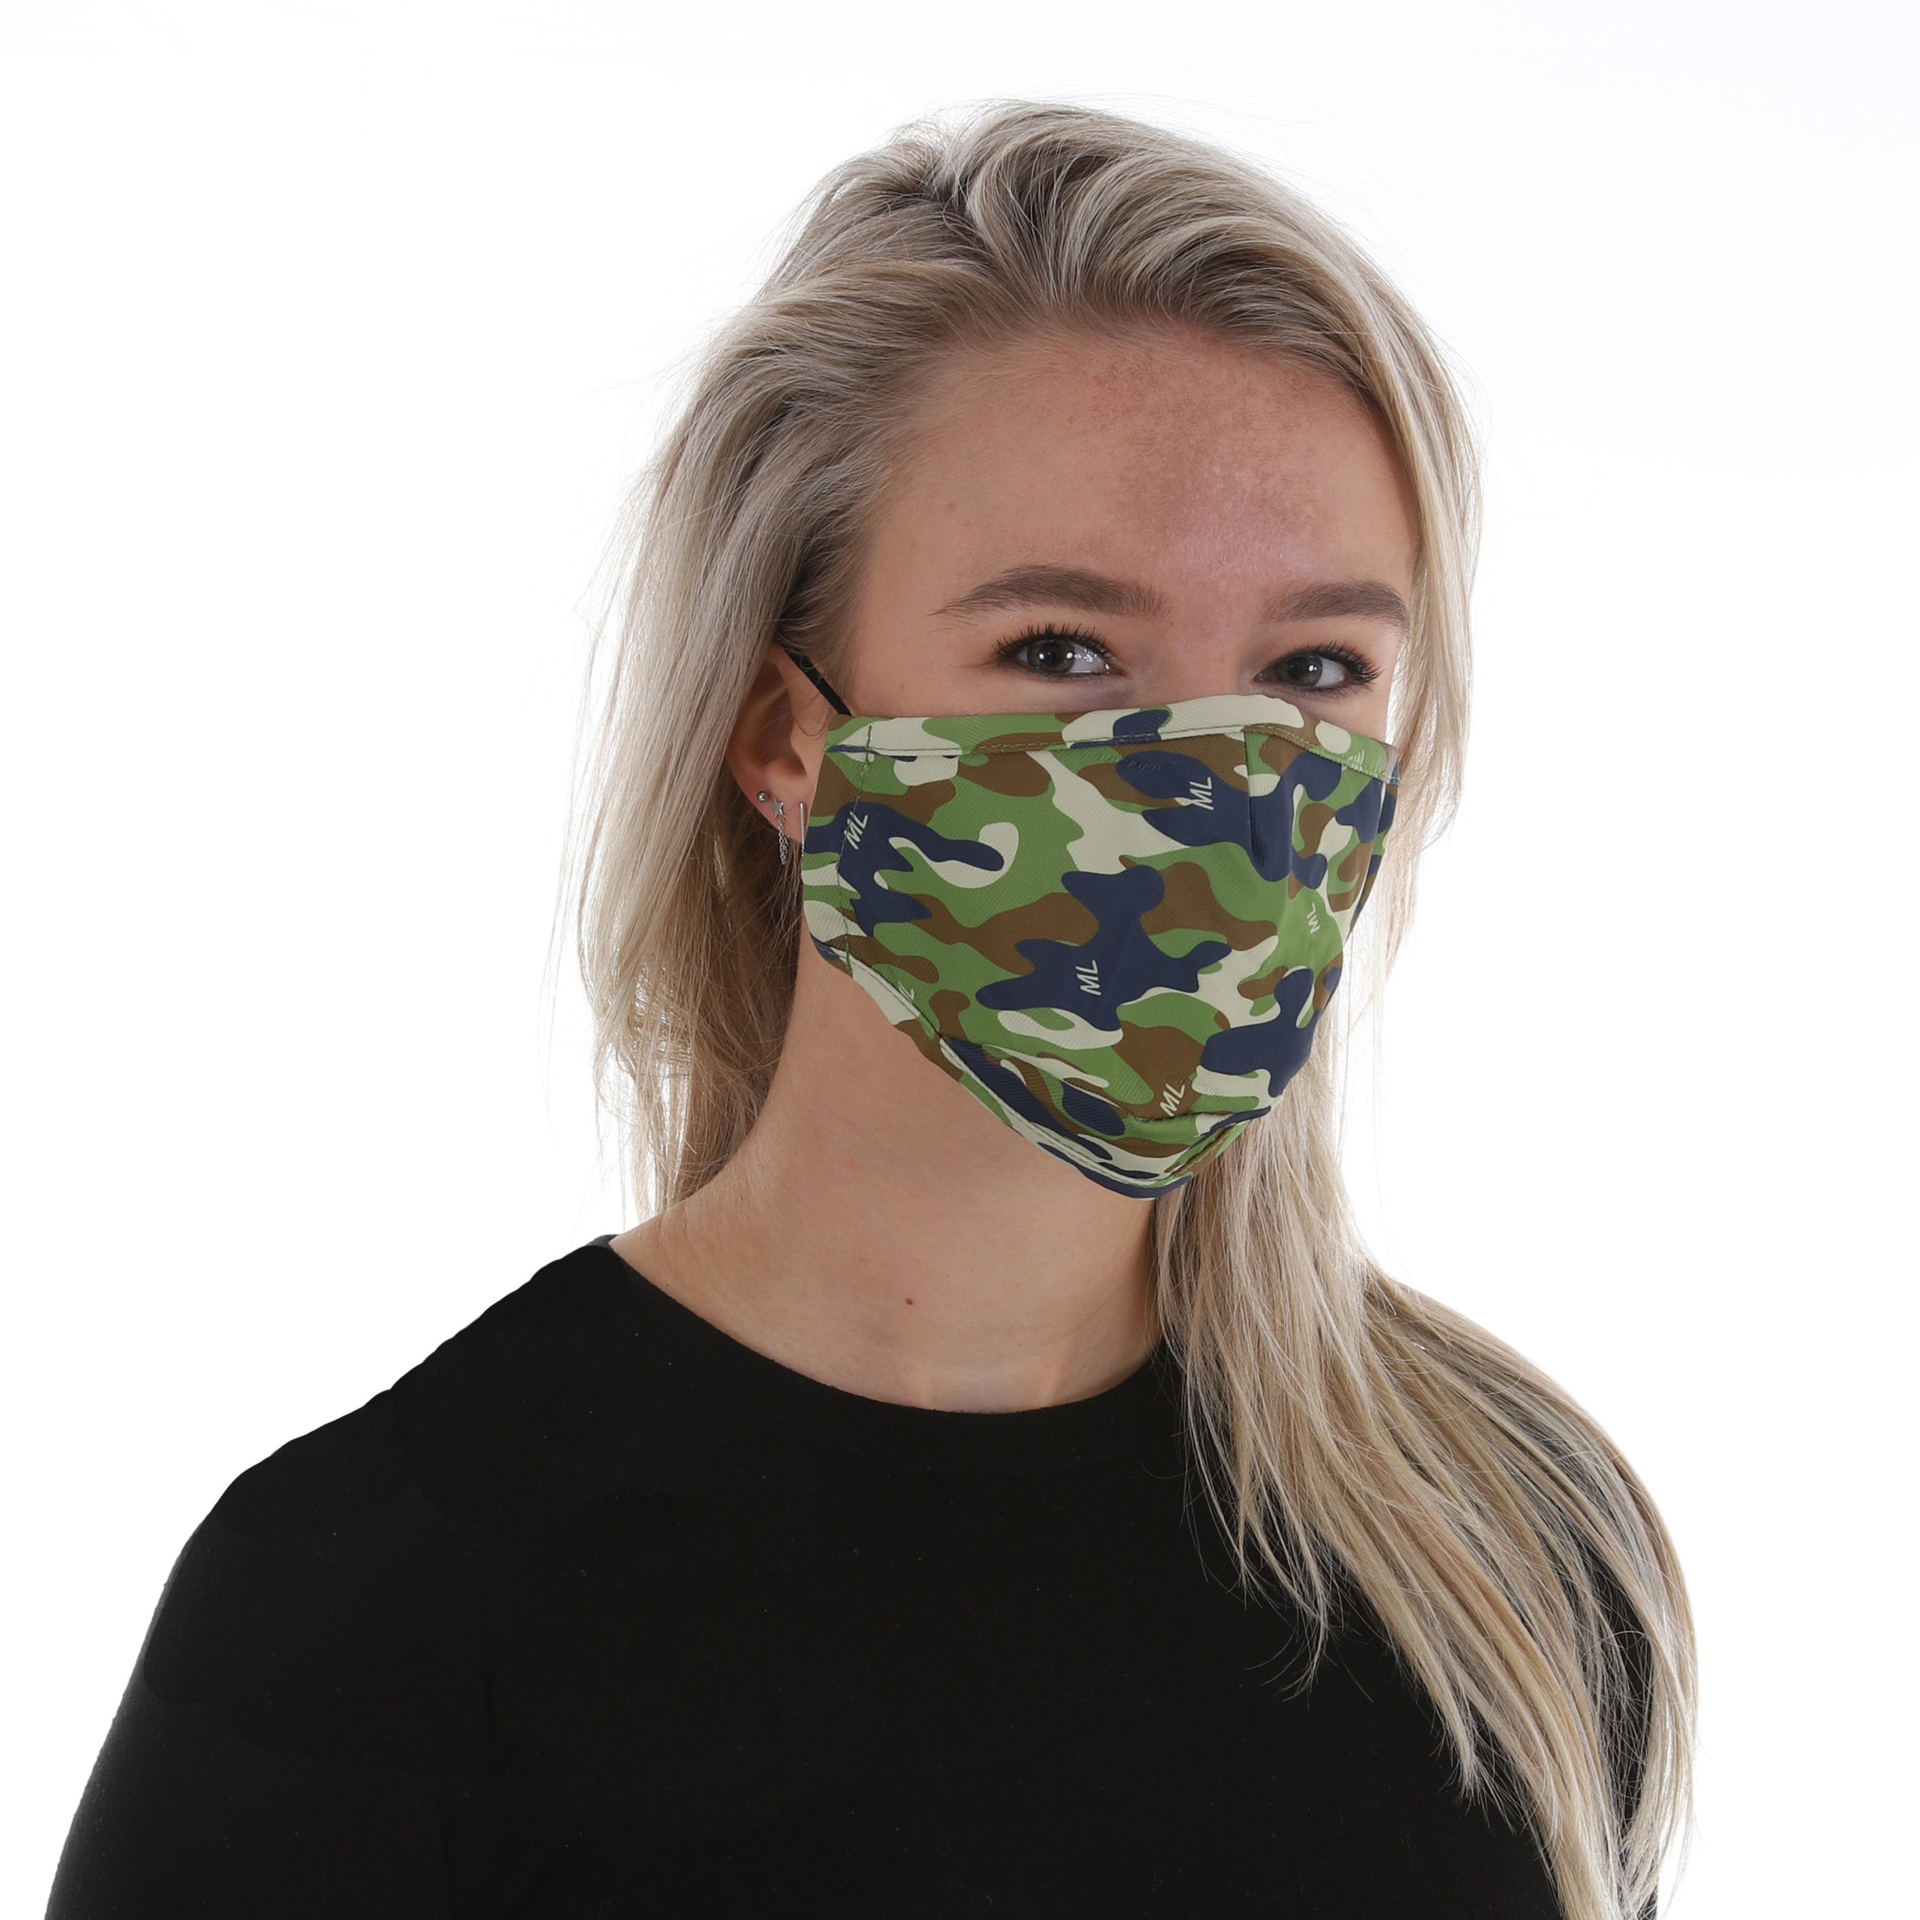 Pre-Shaped Face Mask in camo print being worn